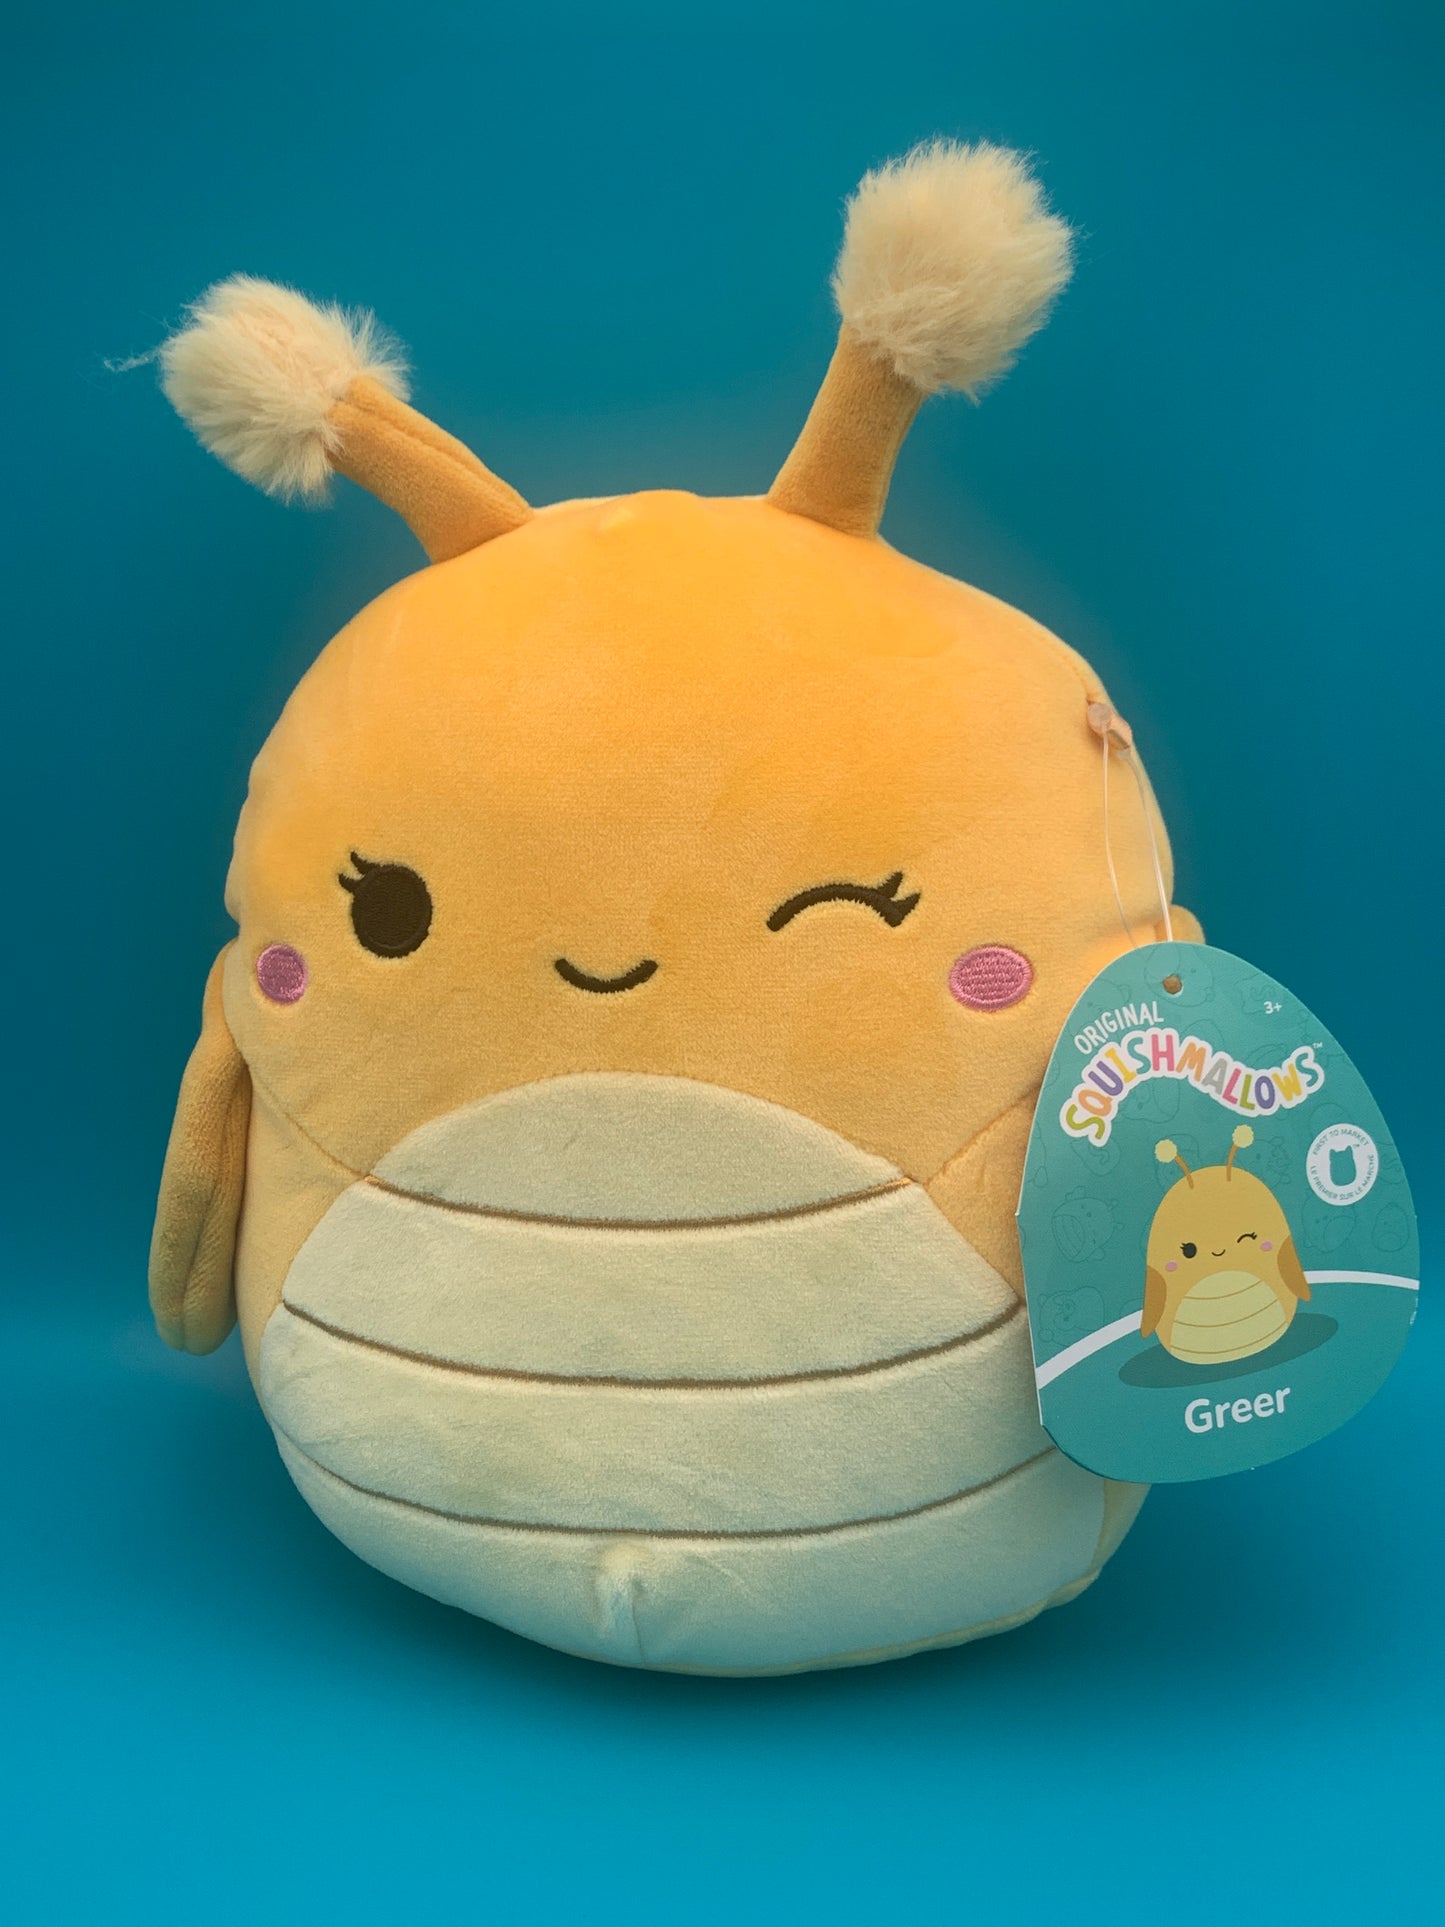 Squishmallow Greer the Grasshopper 7.5" inch